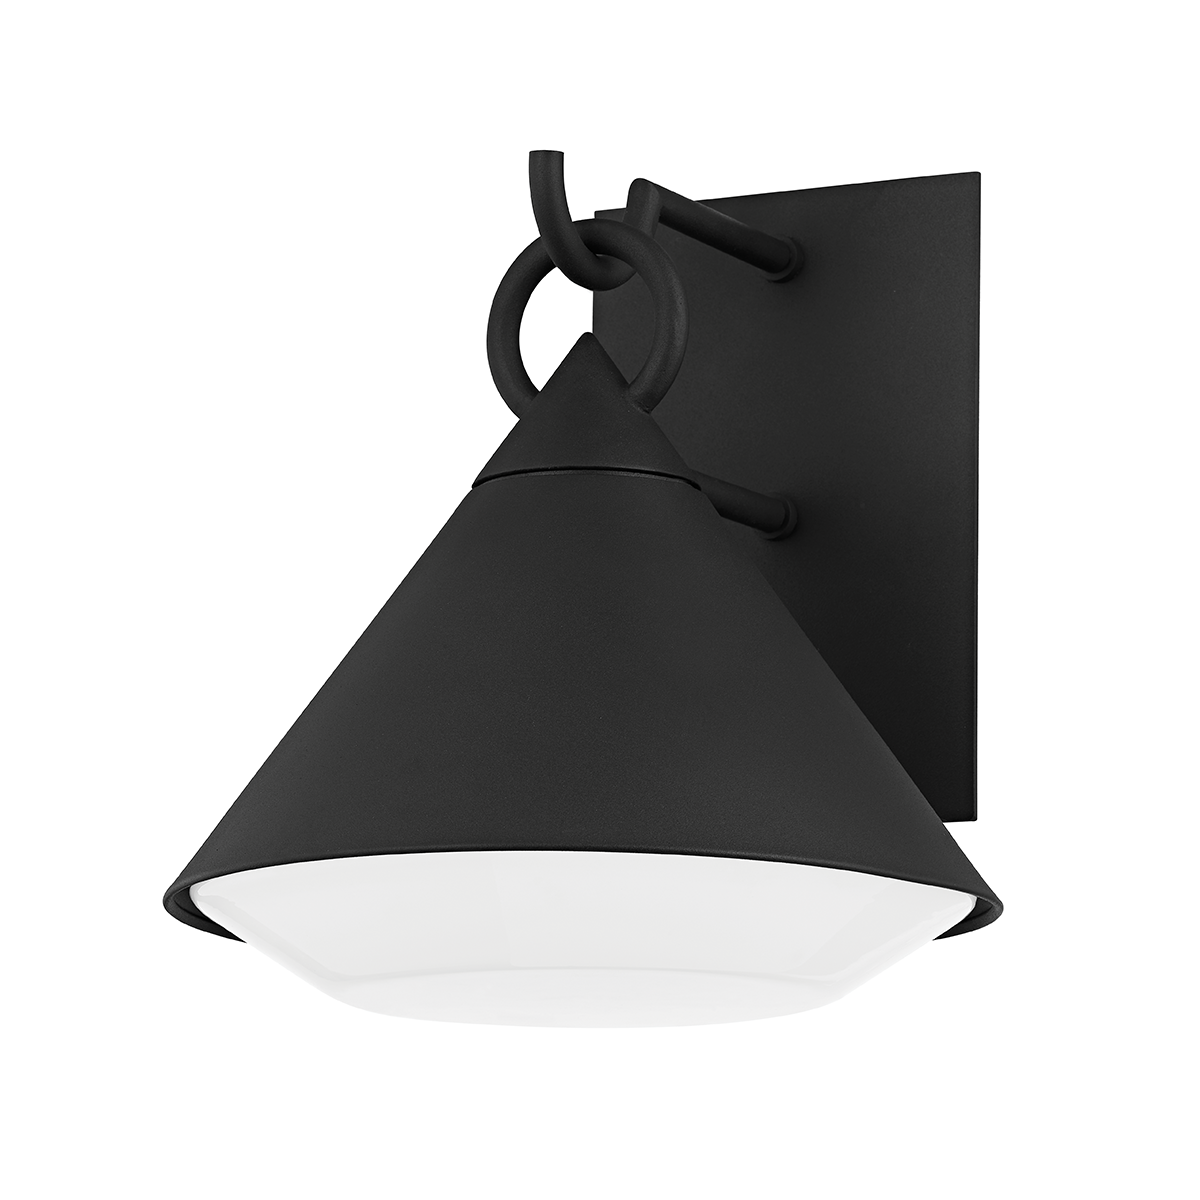 Troy Lighting 1 LIGHT LARGE EXTERIOR WALL SCONCE B9212 Outdoor l Wall Troy Lighting TEXTURE BLACK  